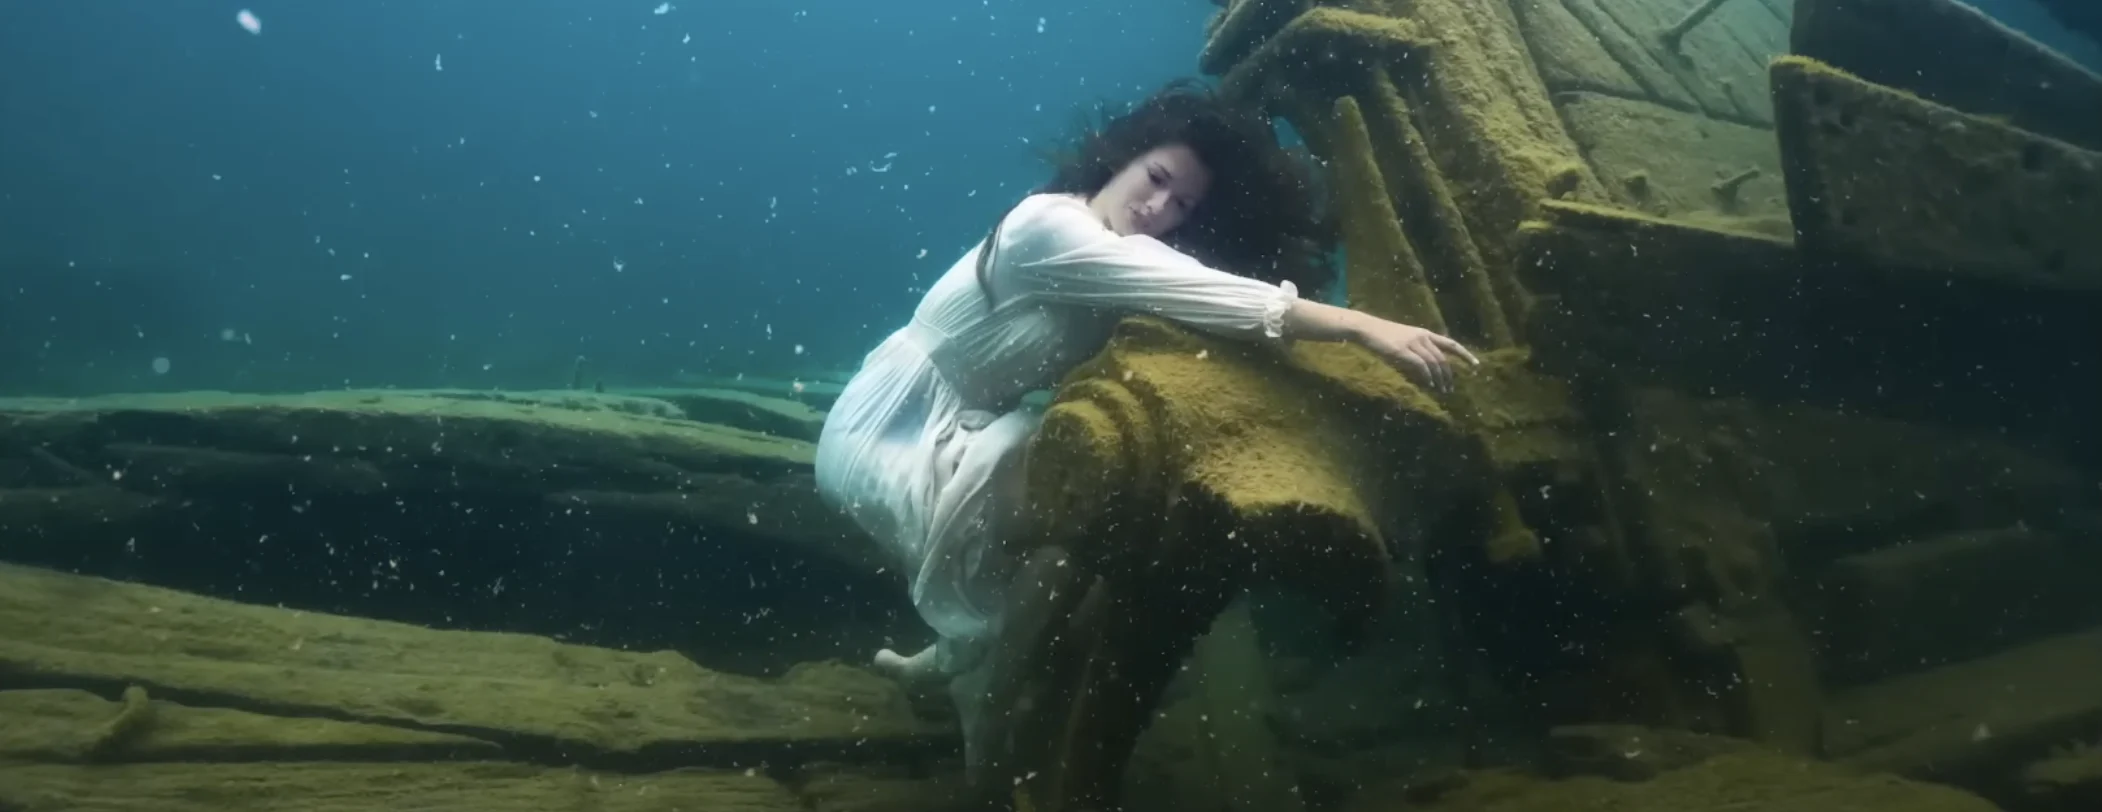 Canadian photographer sets world record for stunning underwater photoshoot